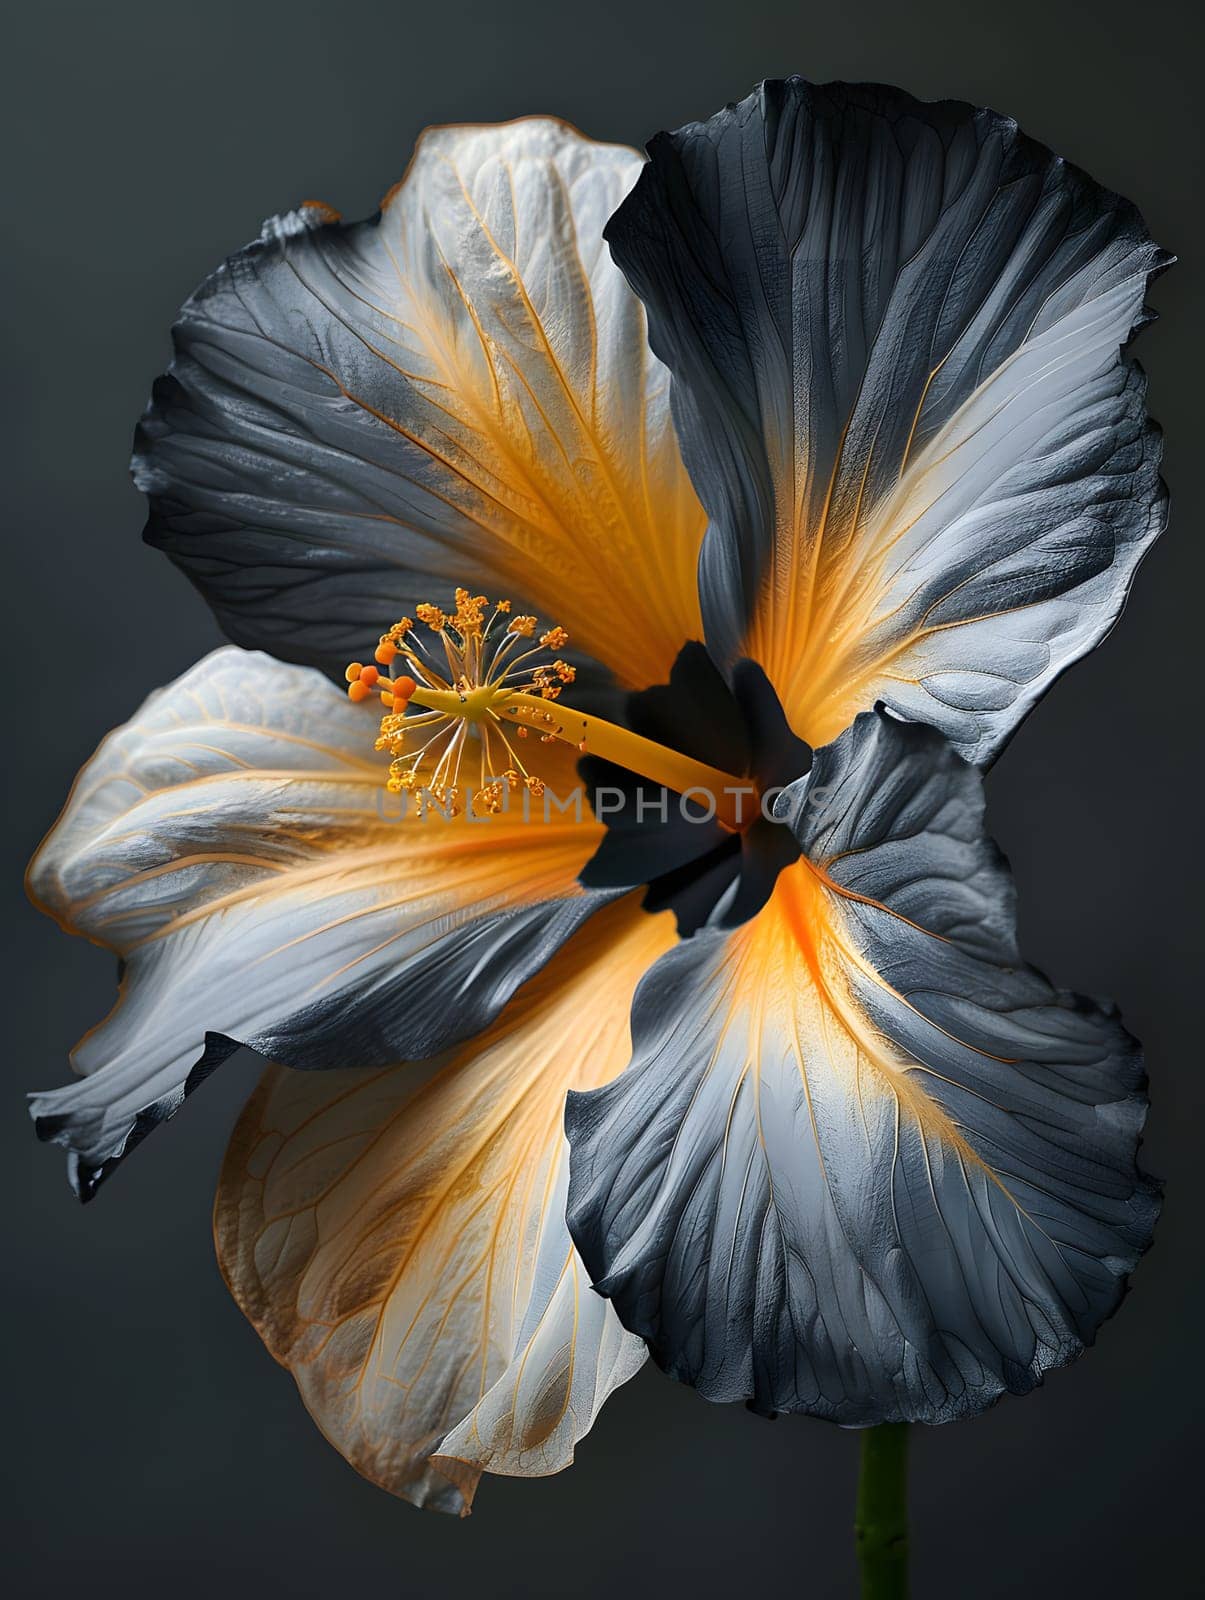 A macro photography close up of a striking black and yellow flower with a bright yellow center, resembling a piece of art in natures still life